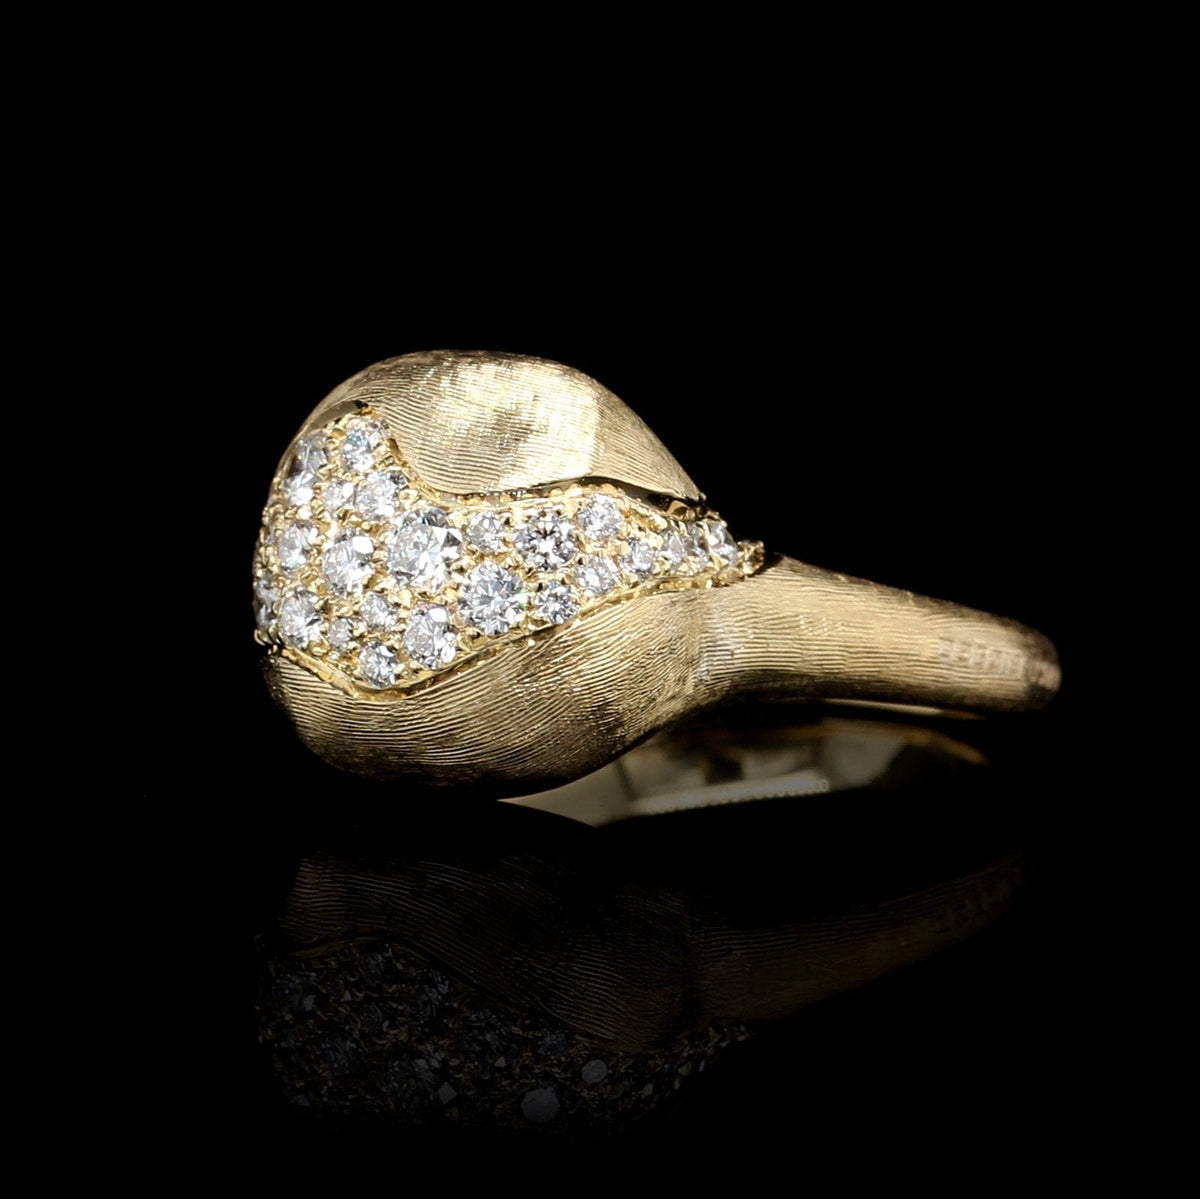 Marco Bicego 18K Yellow Gold Estate and Diamond Africa Ring